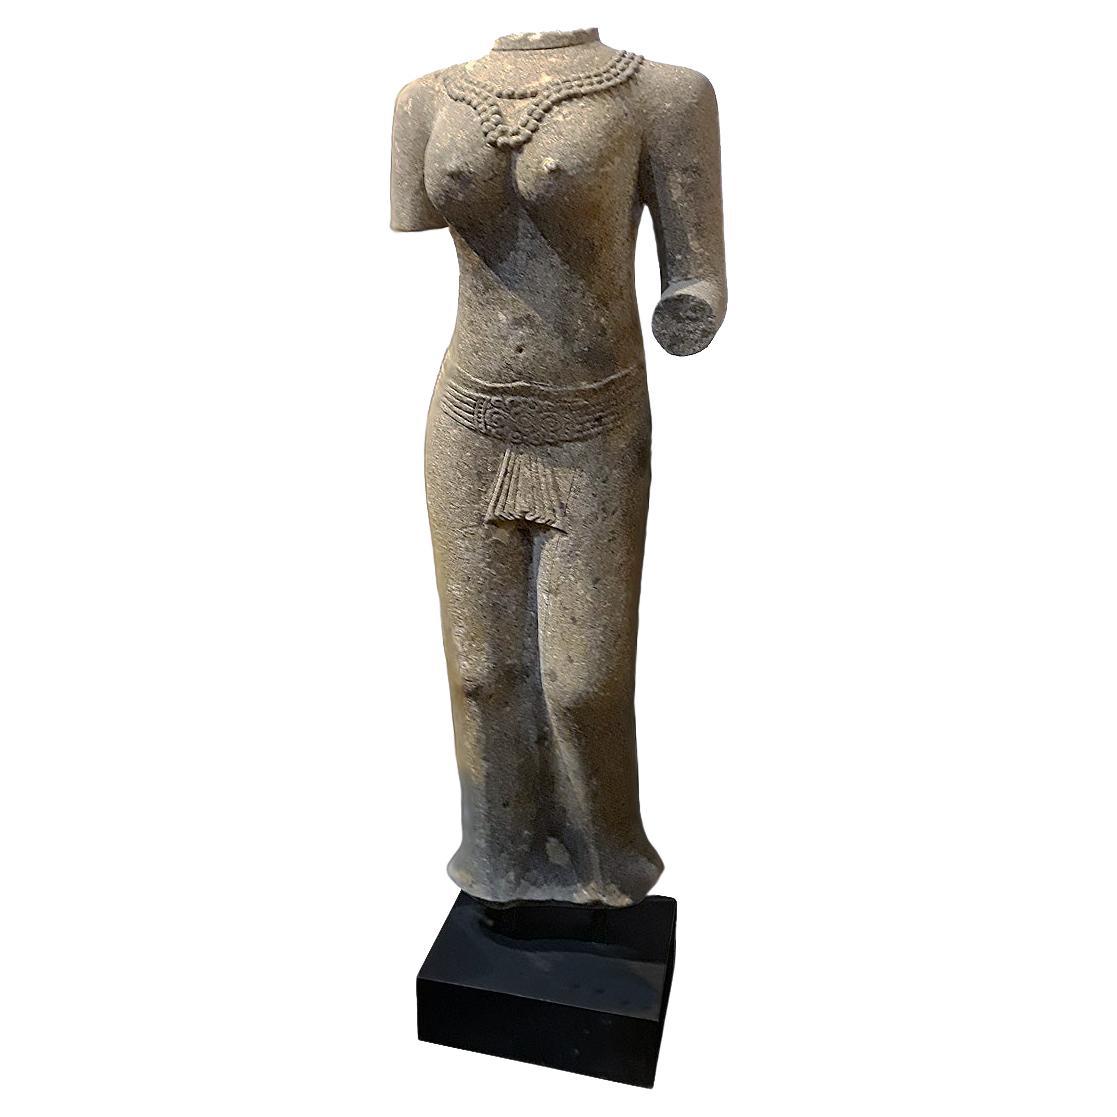 Hand-Carved Sandstone Female Sculpture, Late 20th Century